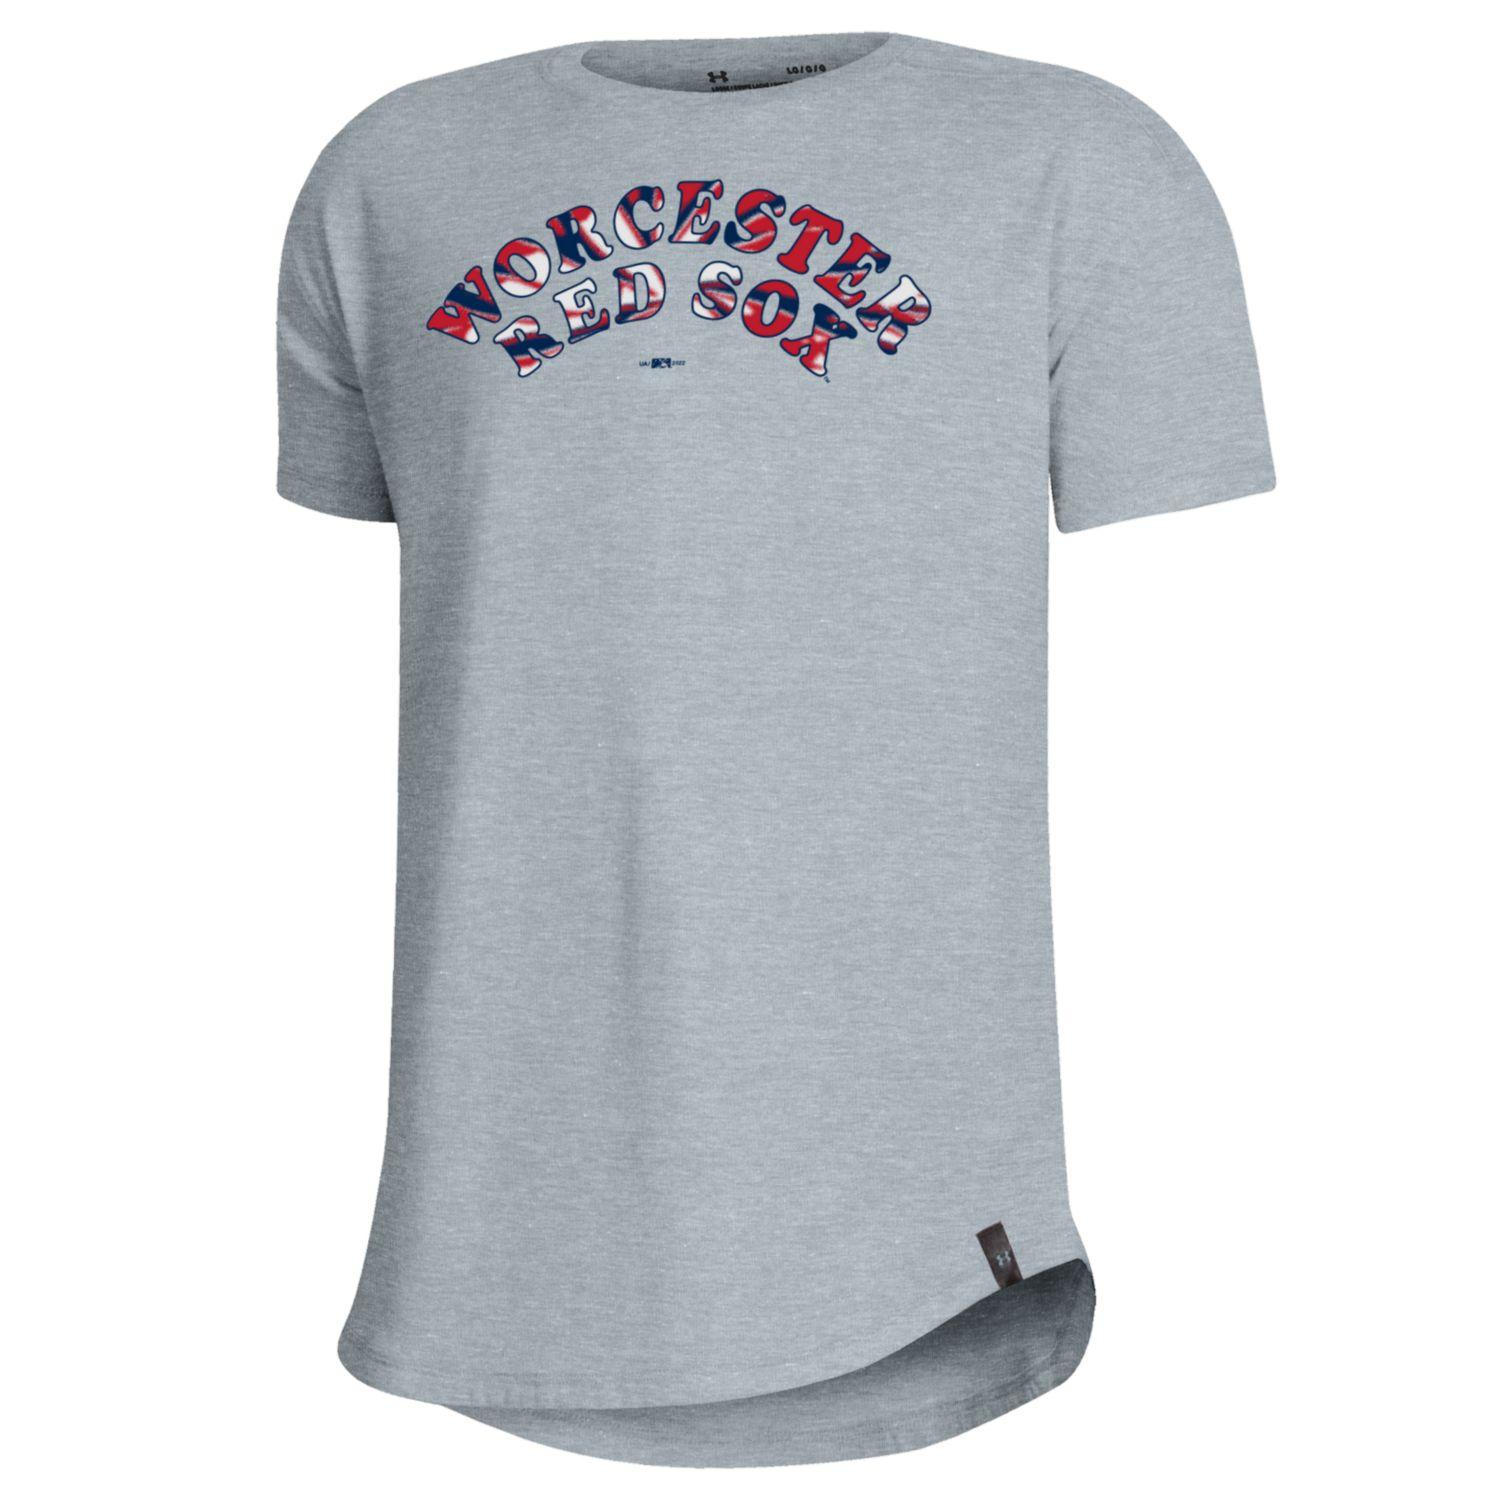 Worcester Red Sox Under Armour Gray Youth Tie Dye Tee LG